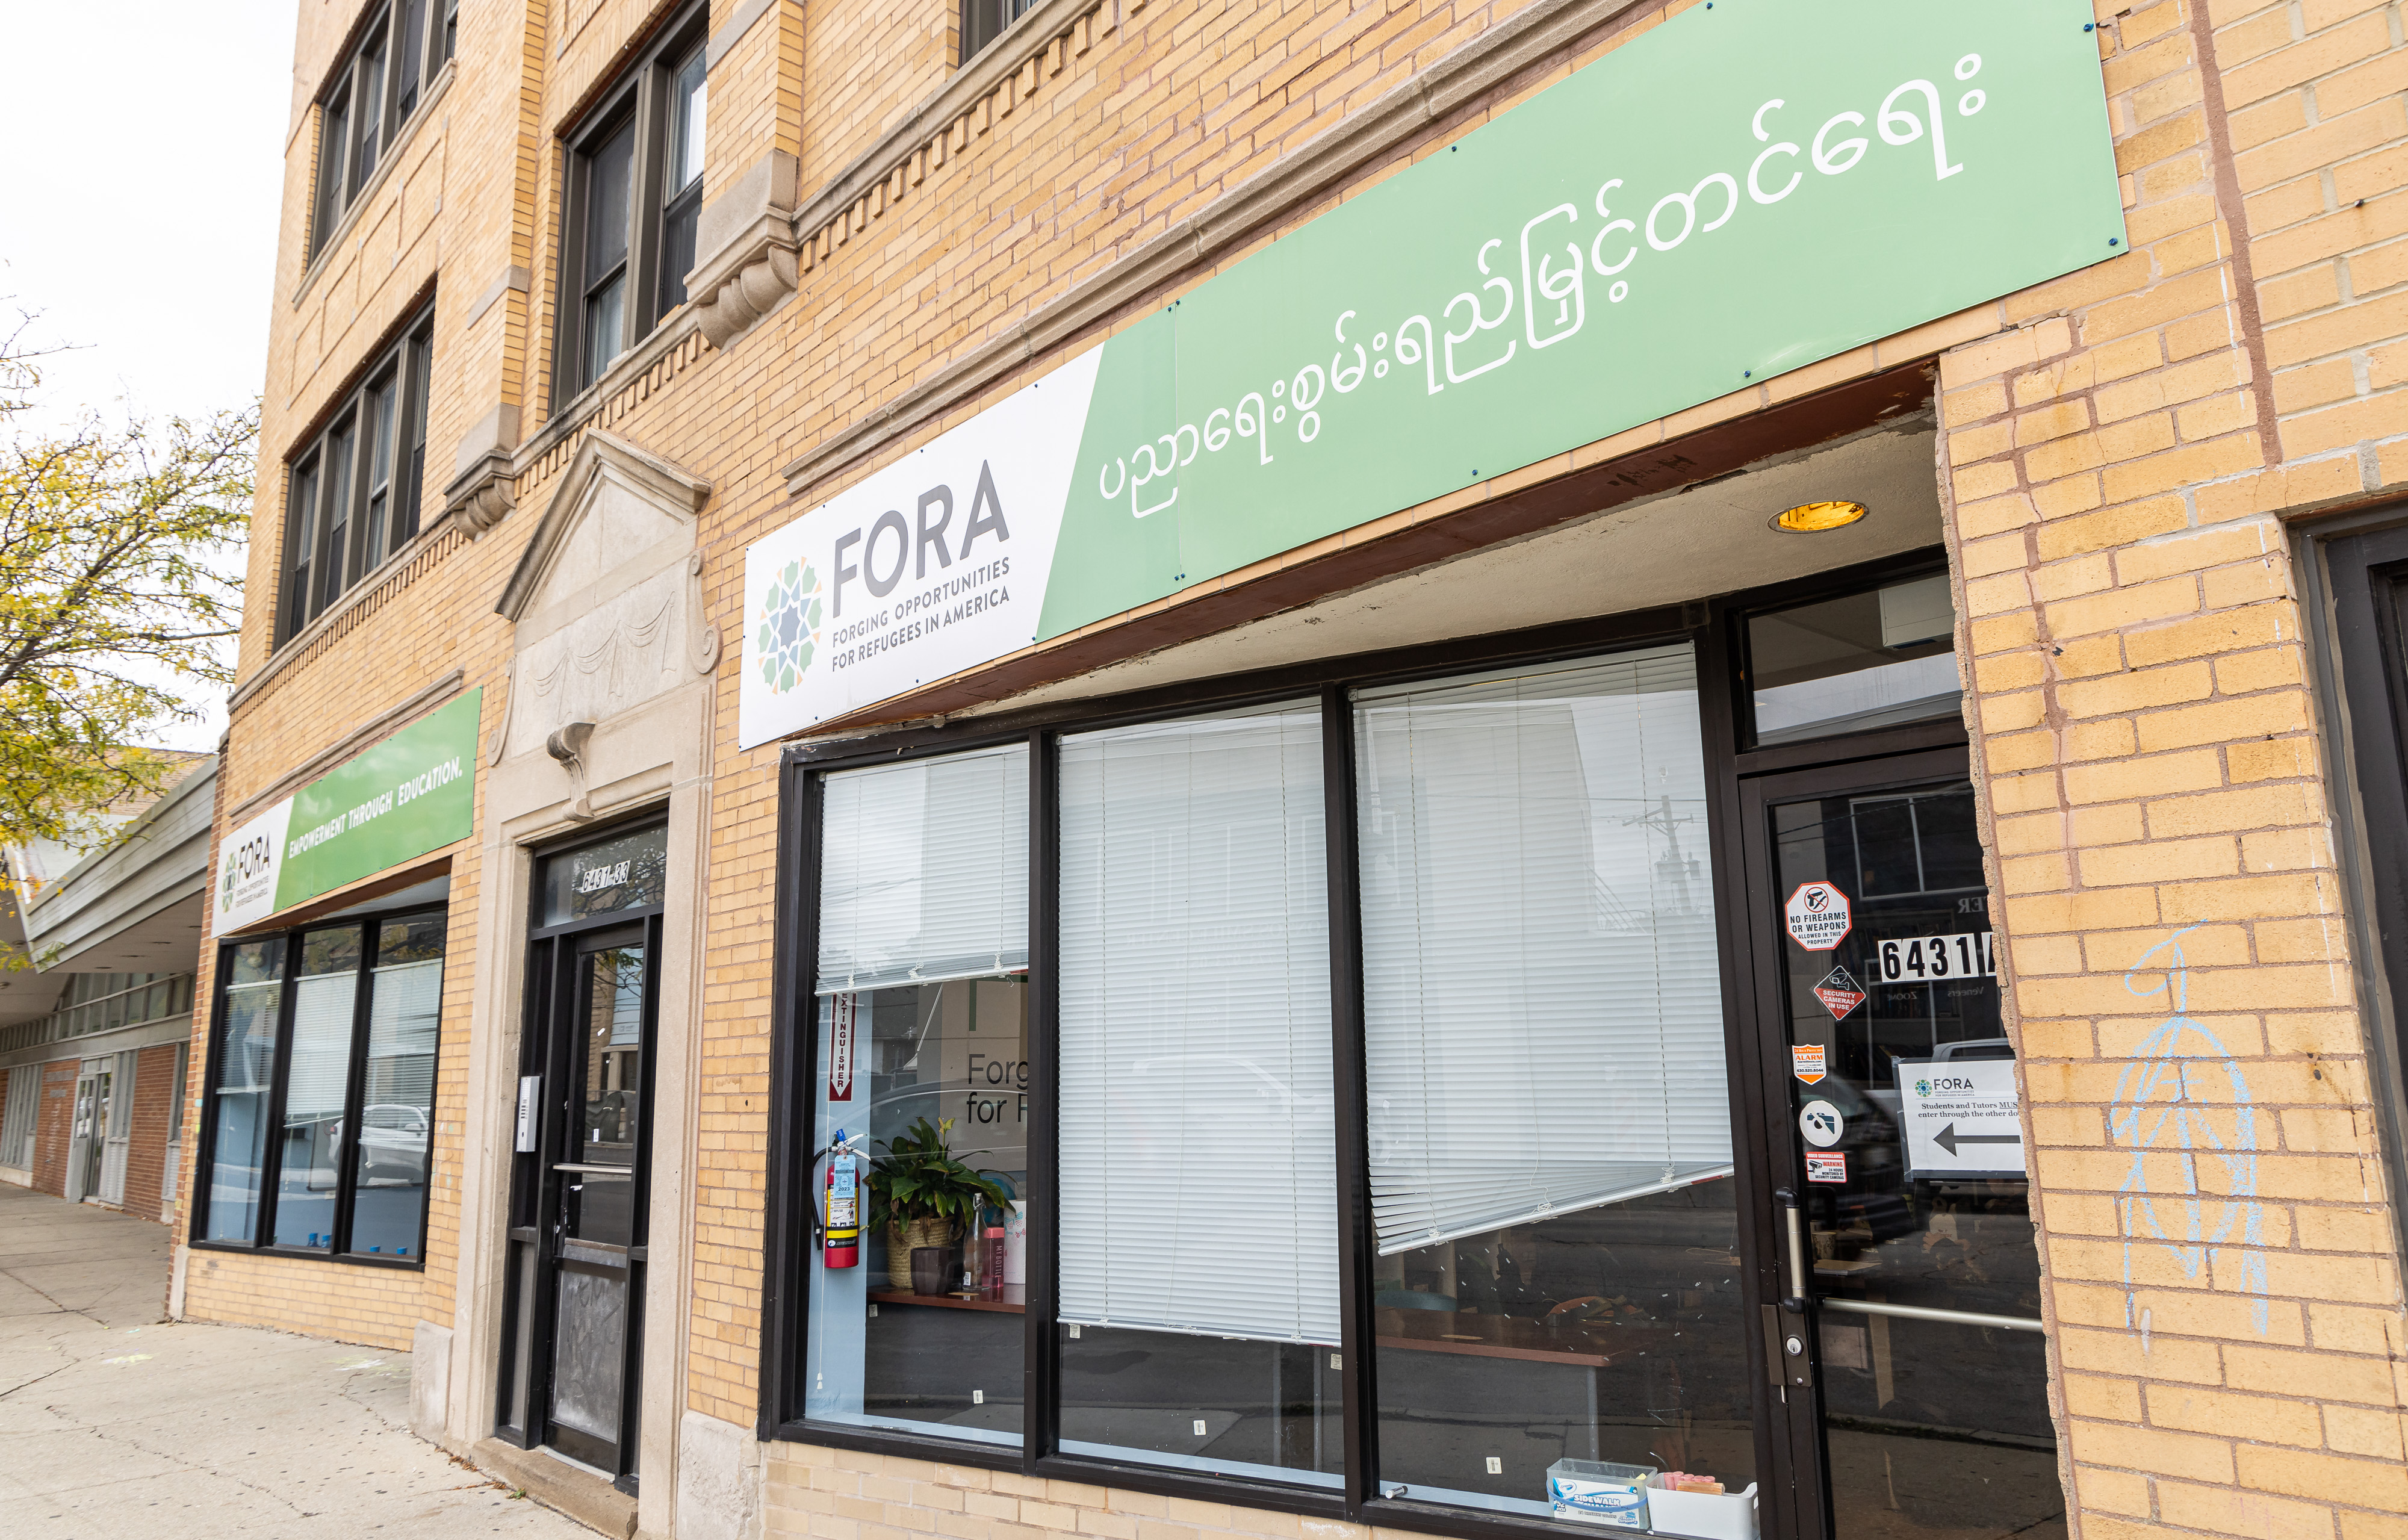 The outside of FORA's building in West Ridge, there is a green sign showing FORA's name and logo